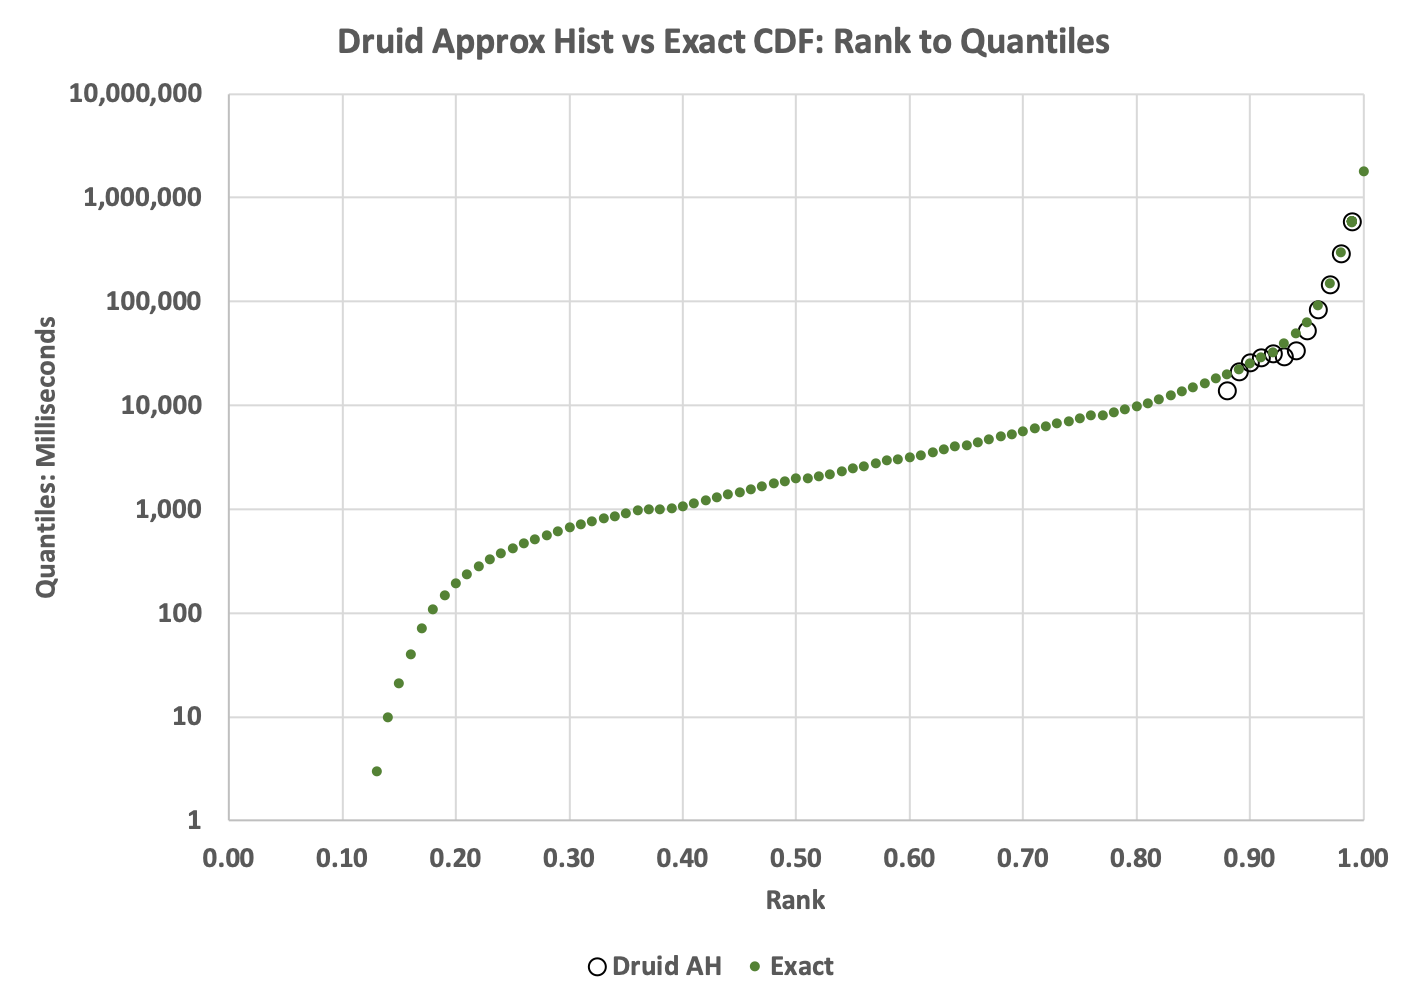 Druid Approx Hist CDF of ranks to quantiles